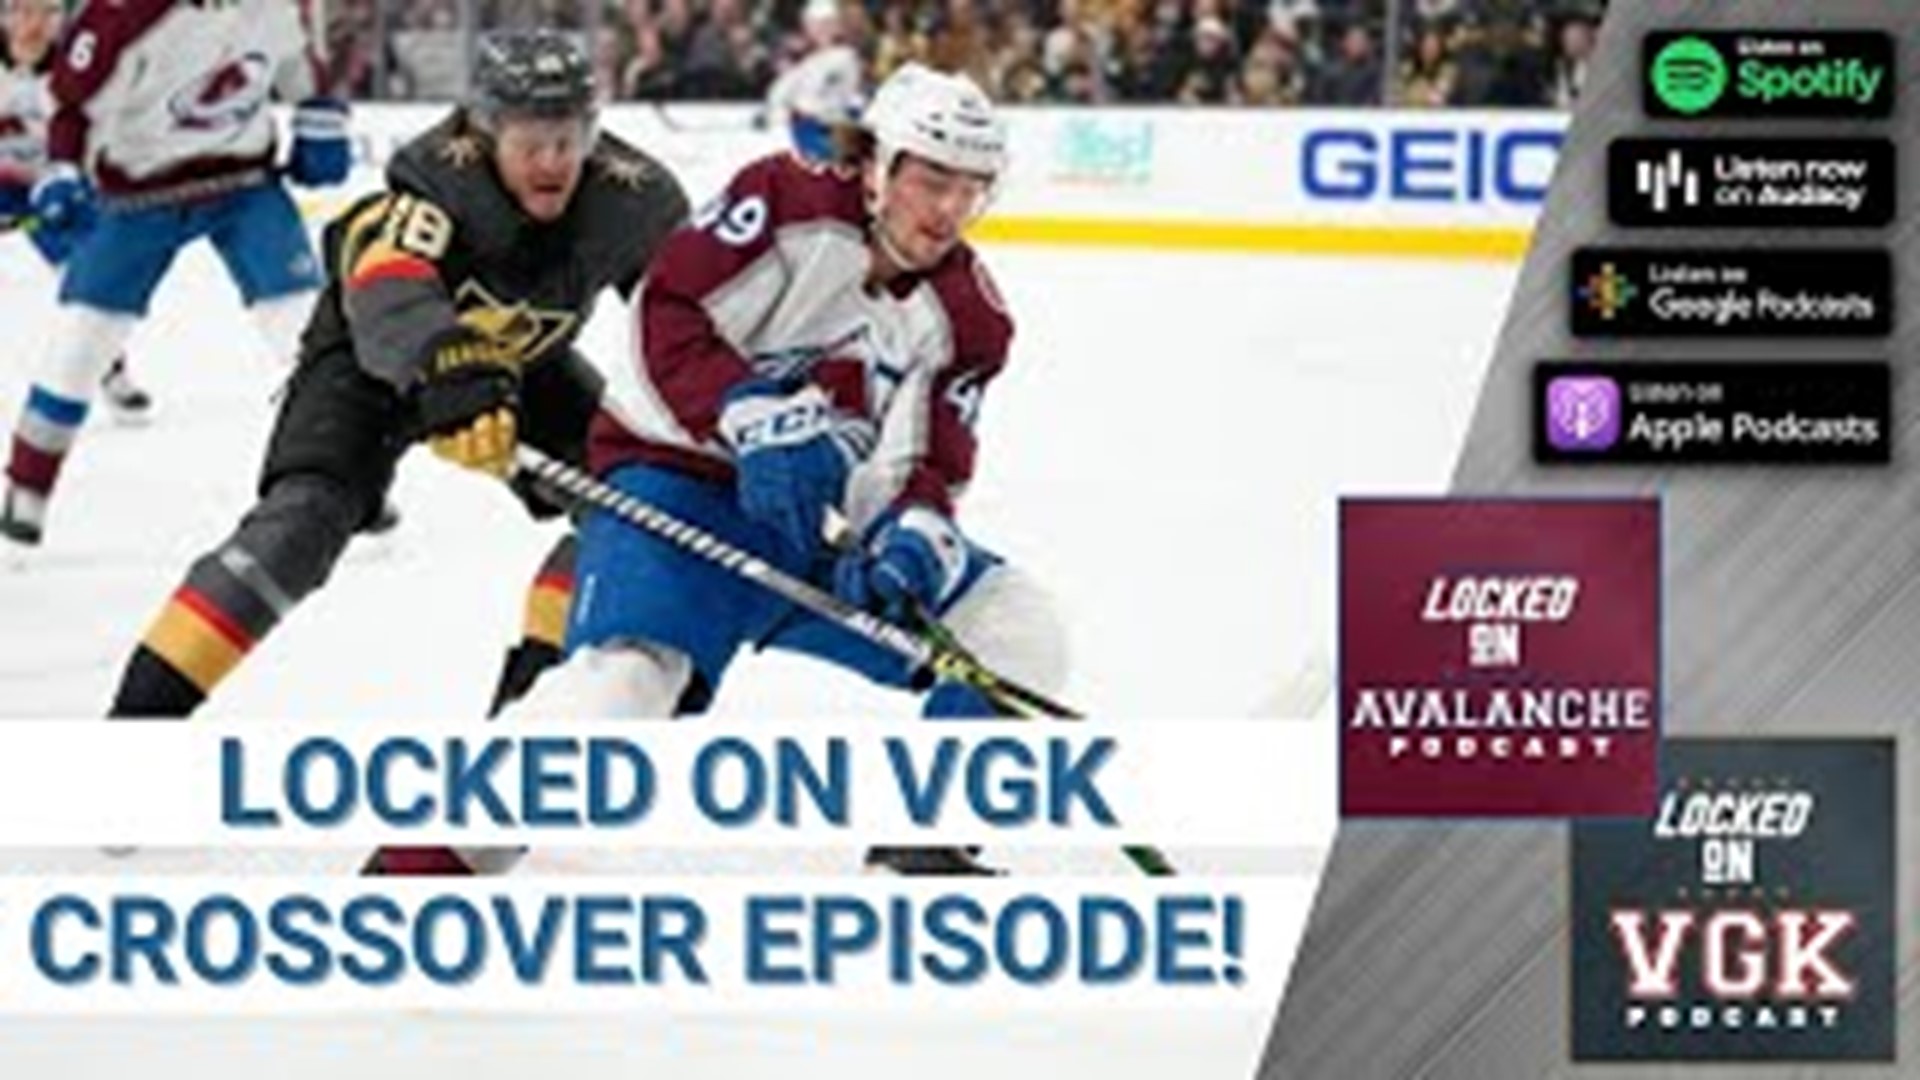 Today we catch up with Locked on VGK host Tony Cordasco, who pulls no punches when it comes to covering the team.